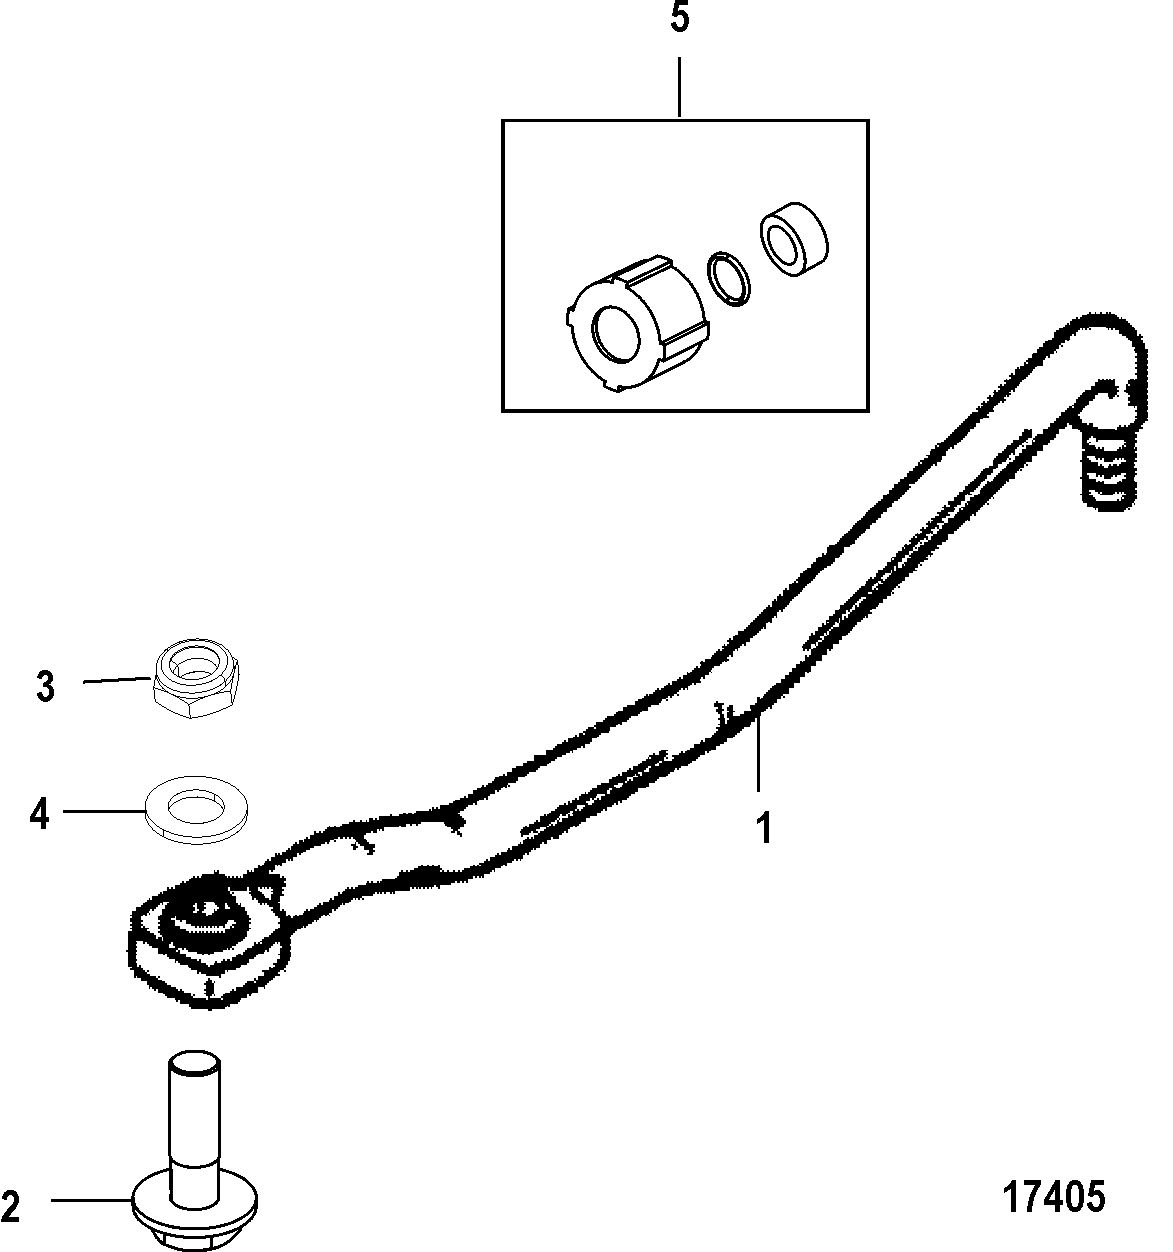 ACCESSORIES STEERING SYSTEMS AND COMPONENTS Attaching Kit(19609A3 and 19608A5)